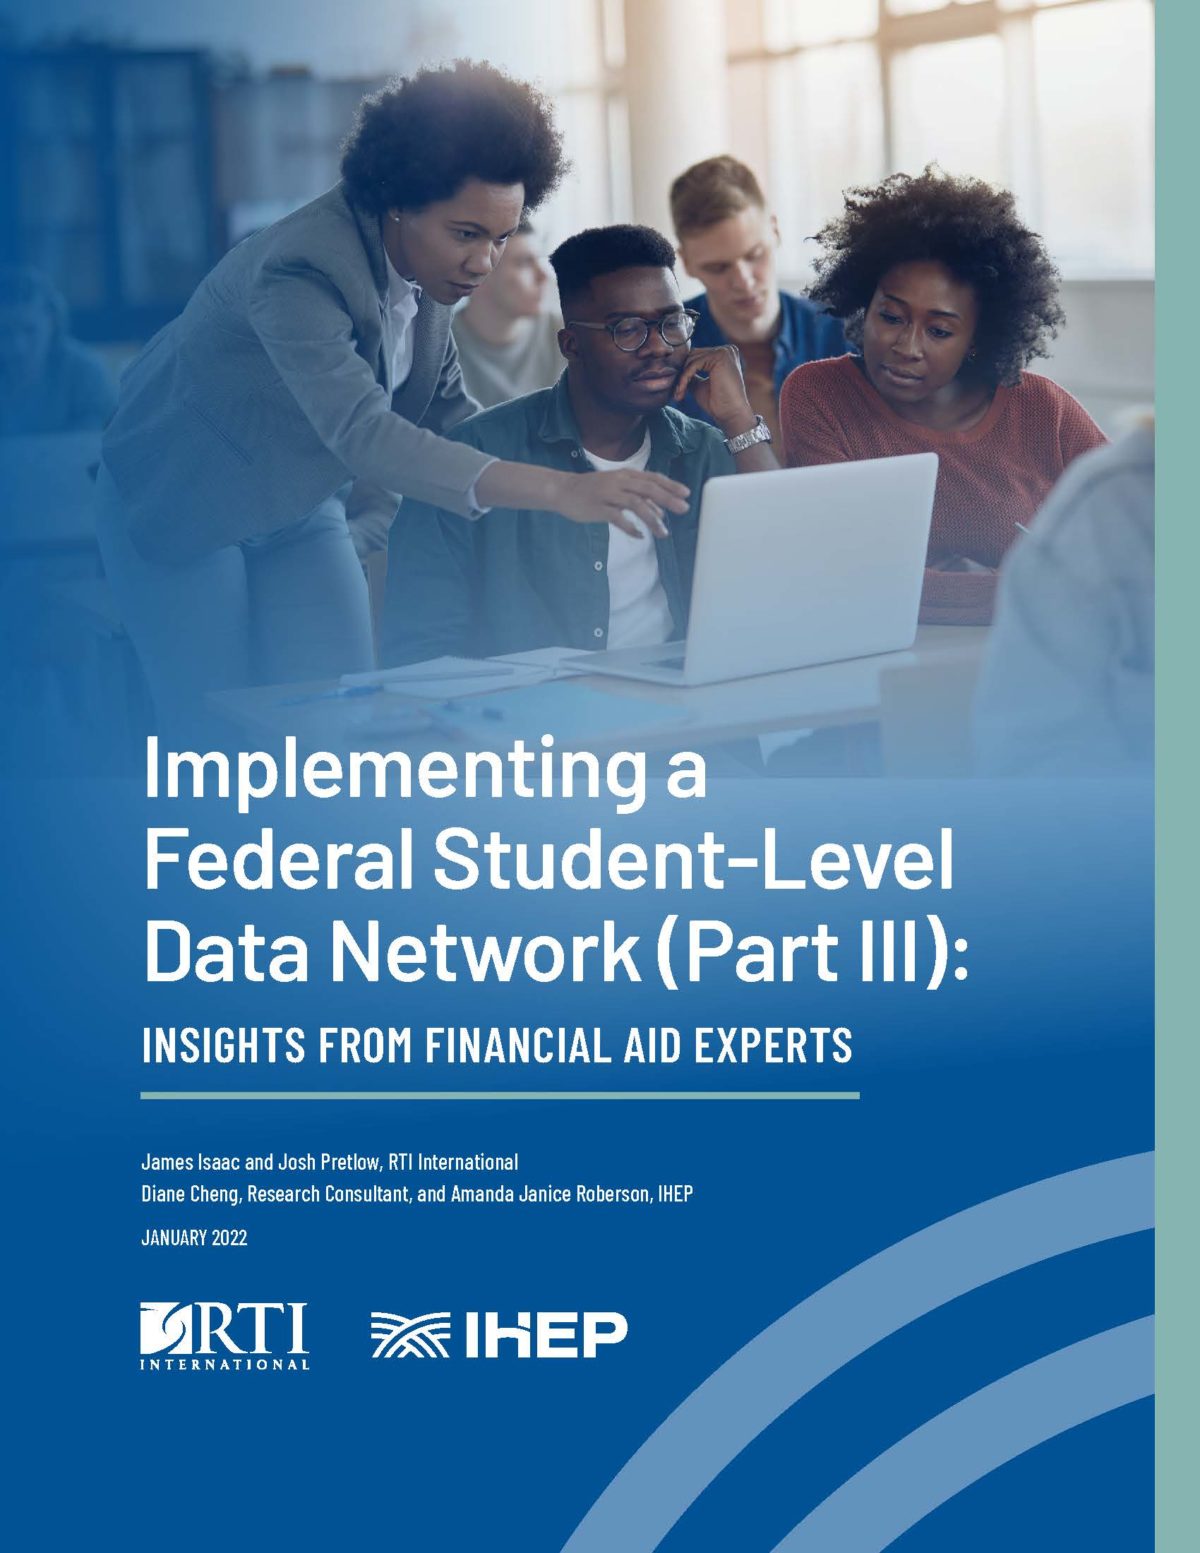 Implementing a Student-Level Data Network (Part III): Insights from Financial Aid Experts